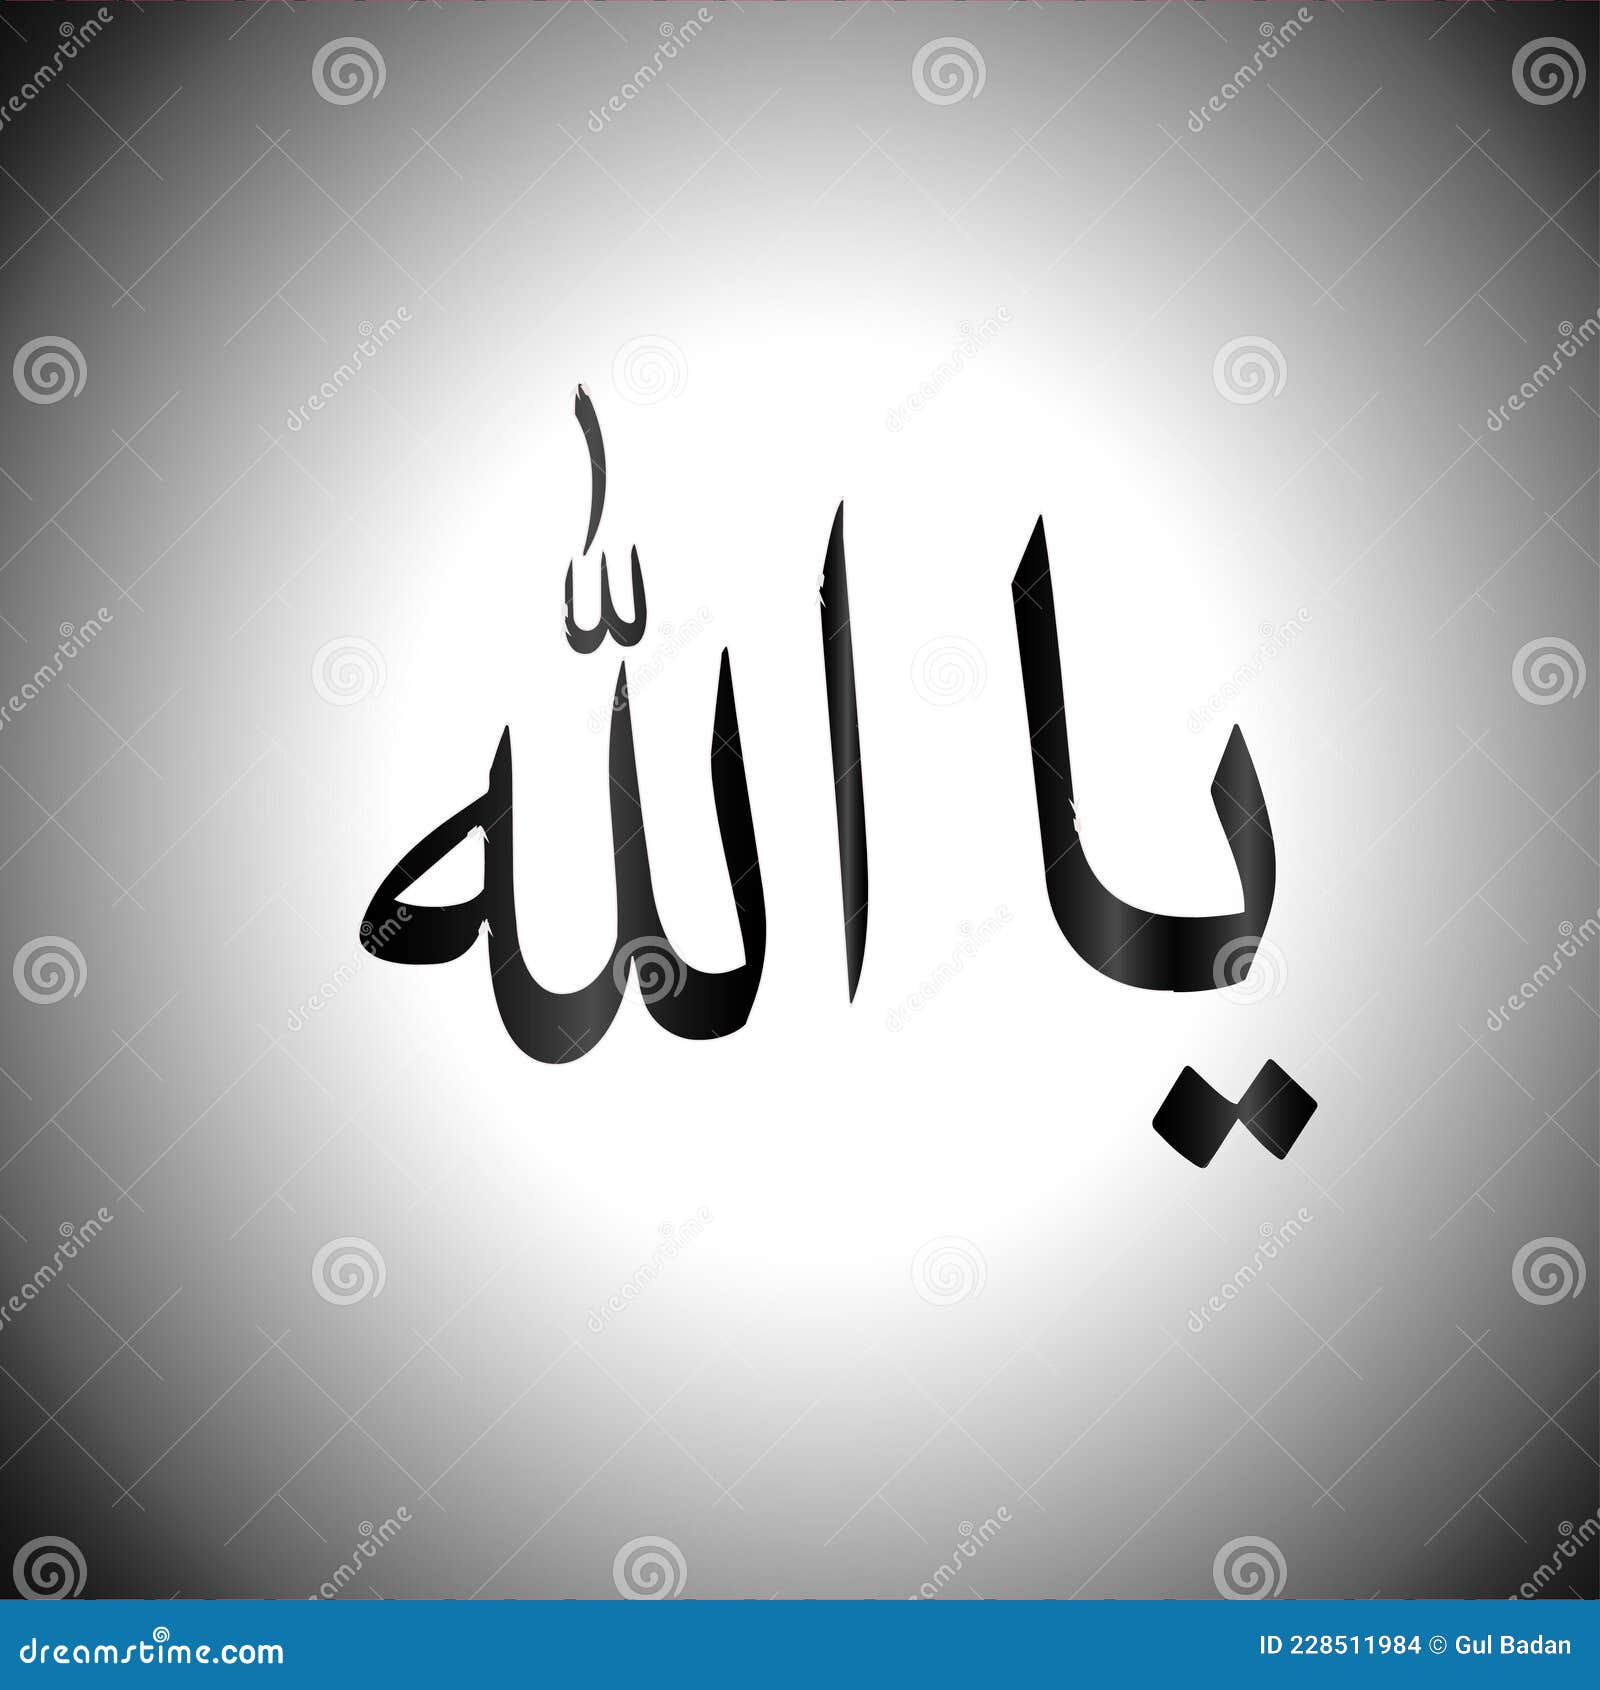 I Love Allah wallpaper by Sonia  Download on ZEDGE  985a